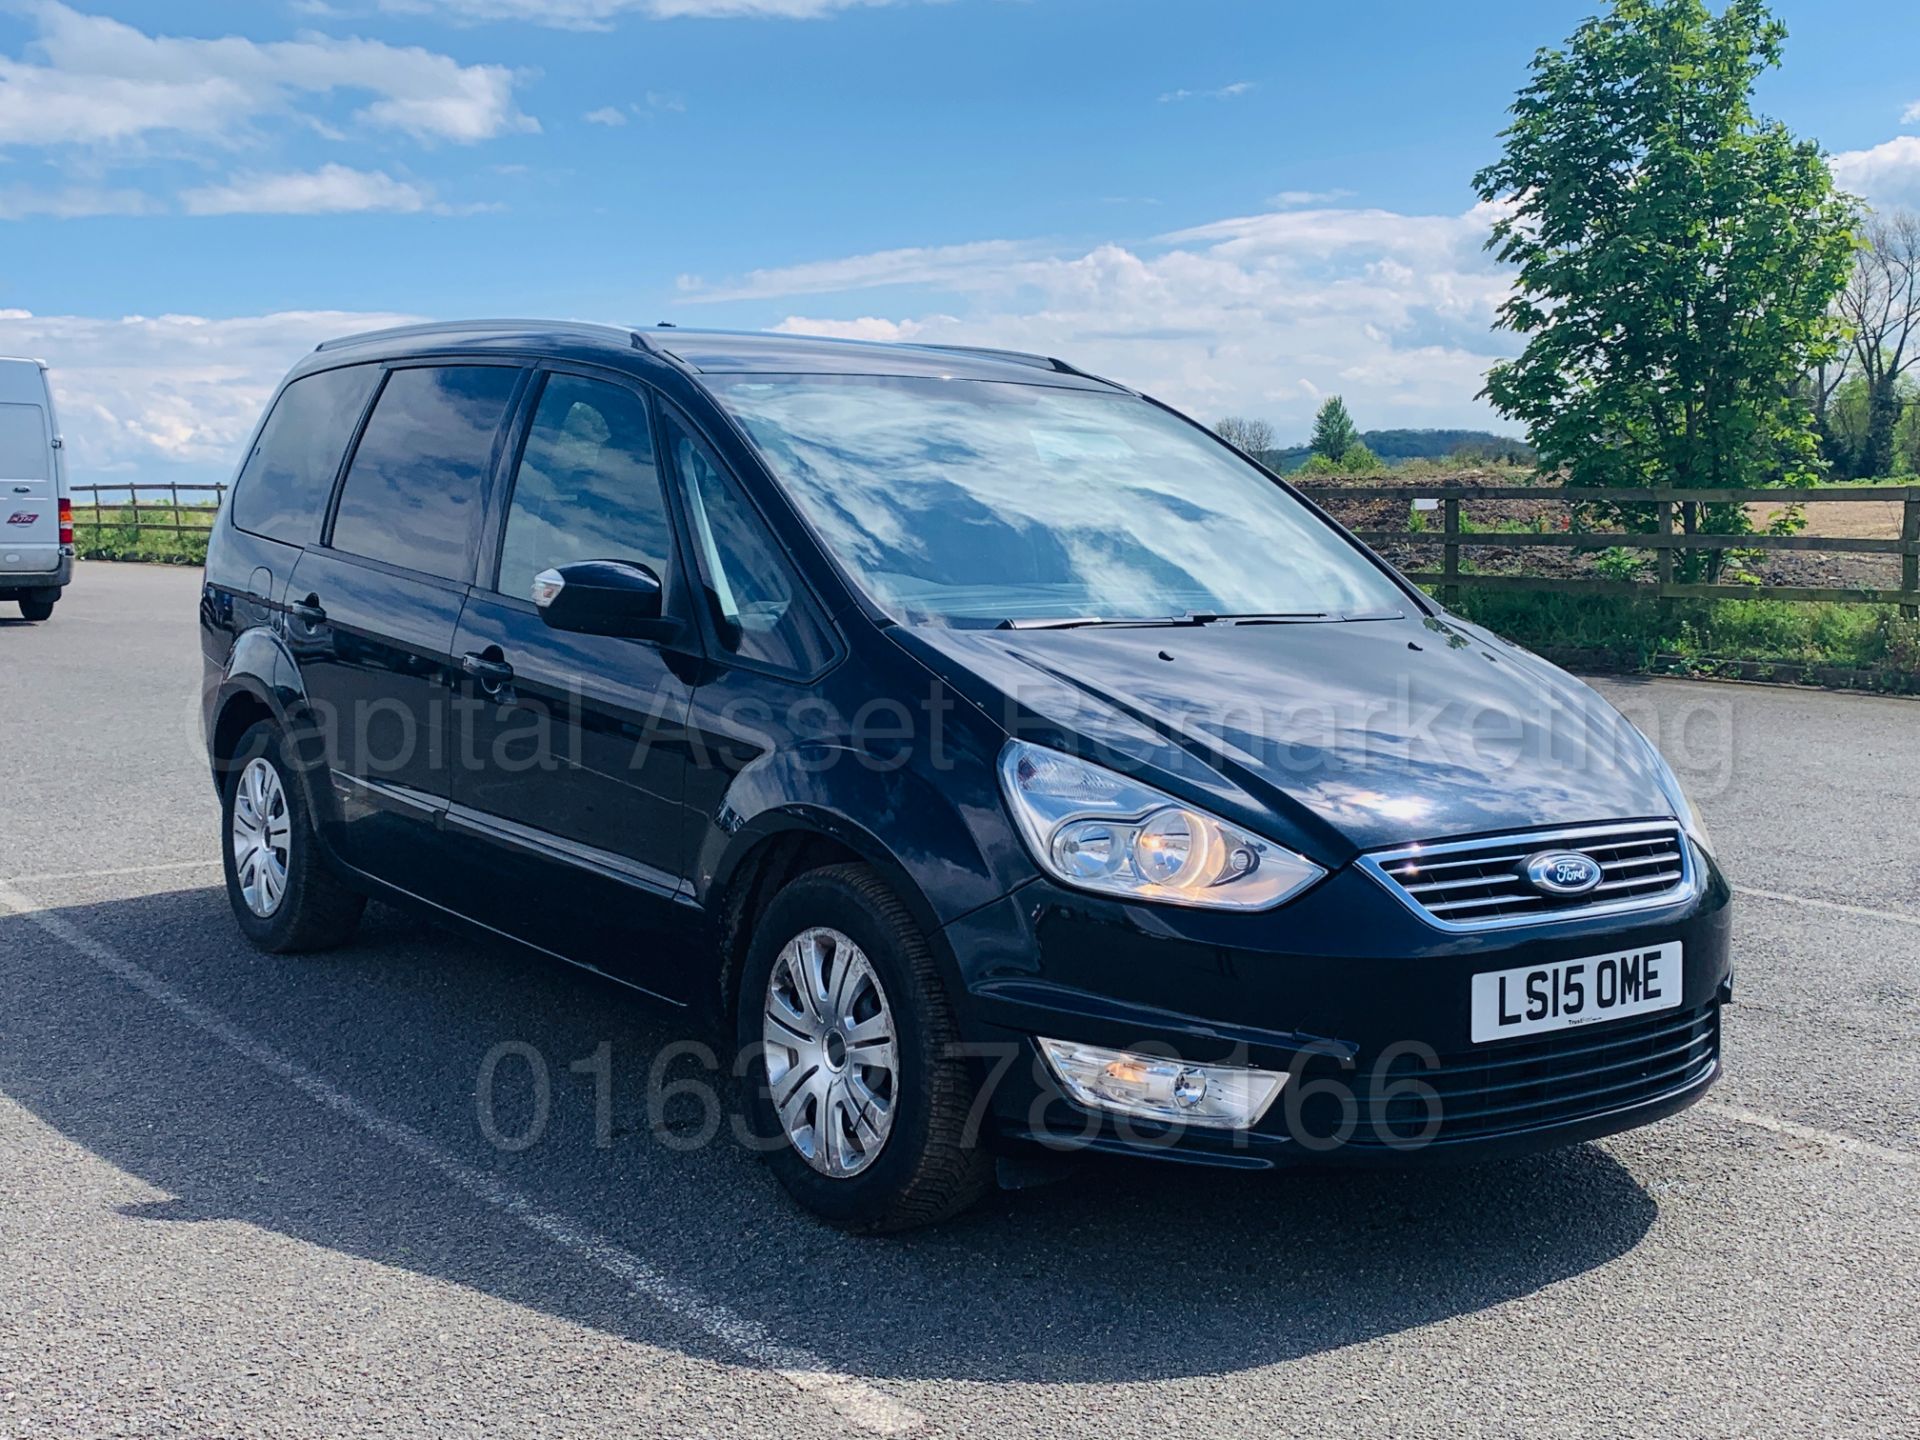 (On Sale) FORD GALAXY *ZETEC* 7 SEATER MPV (2015) '2.0 TDCI - 140 BHP - POWER SHIFT' (1 OWNER) - Image 11 of 37